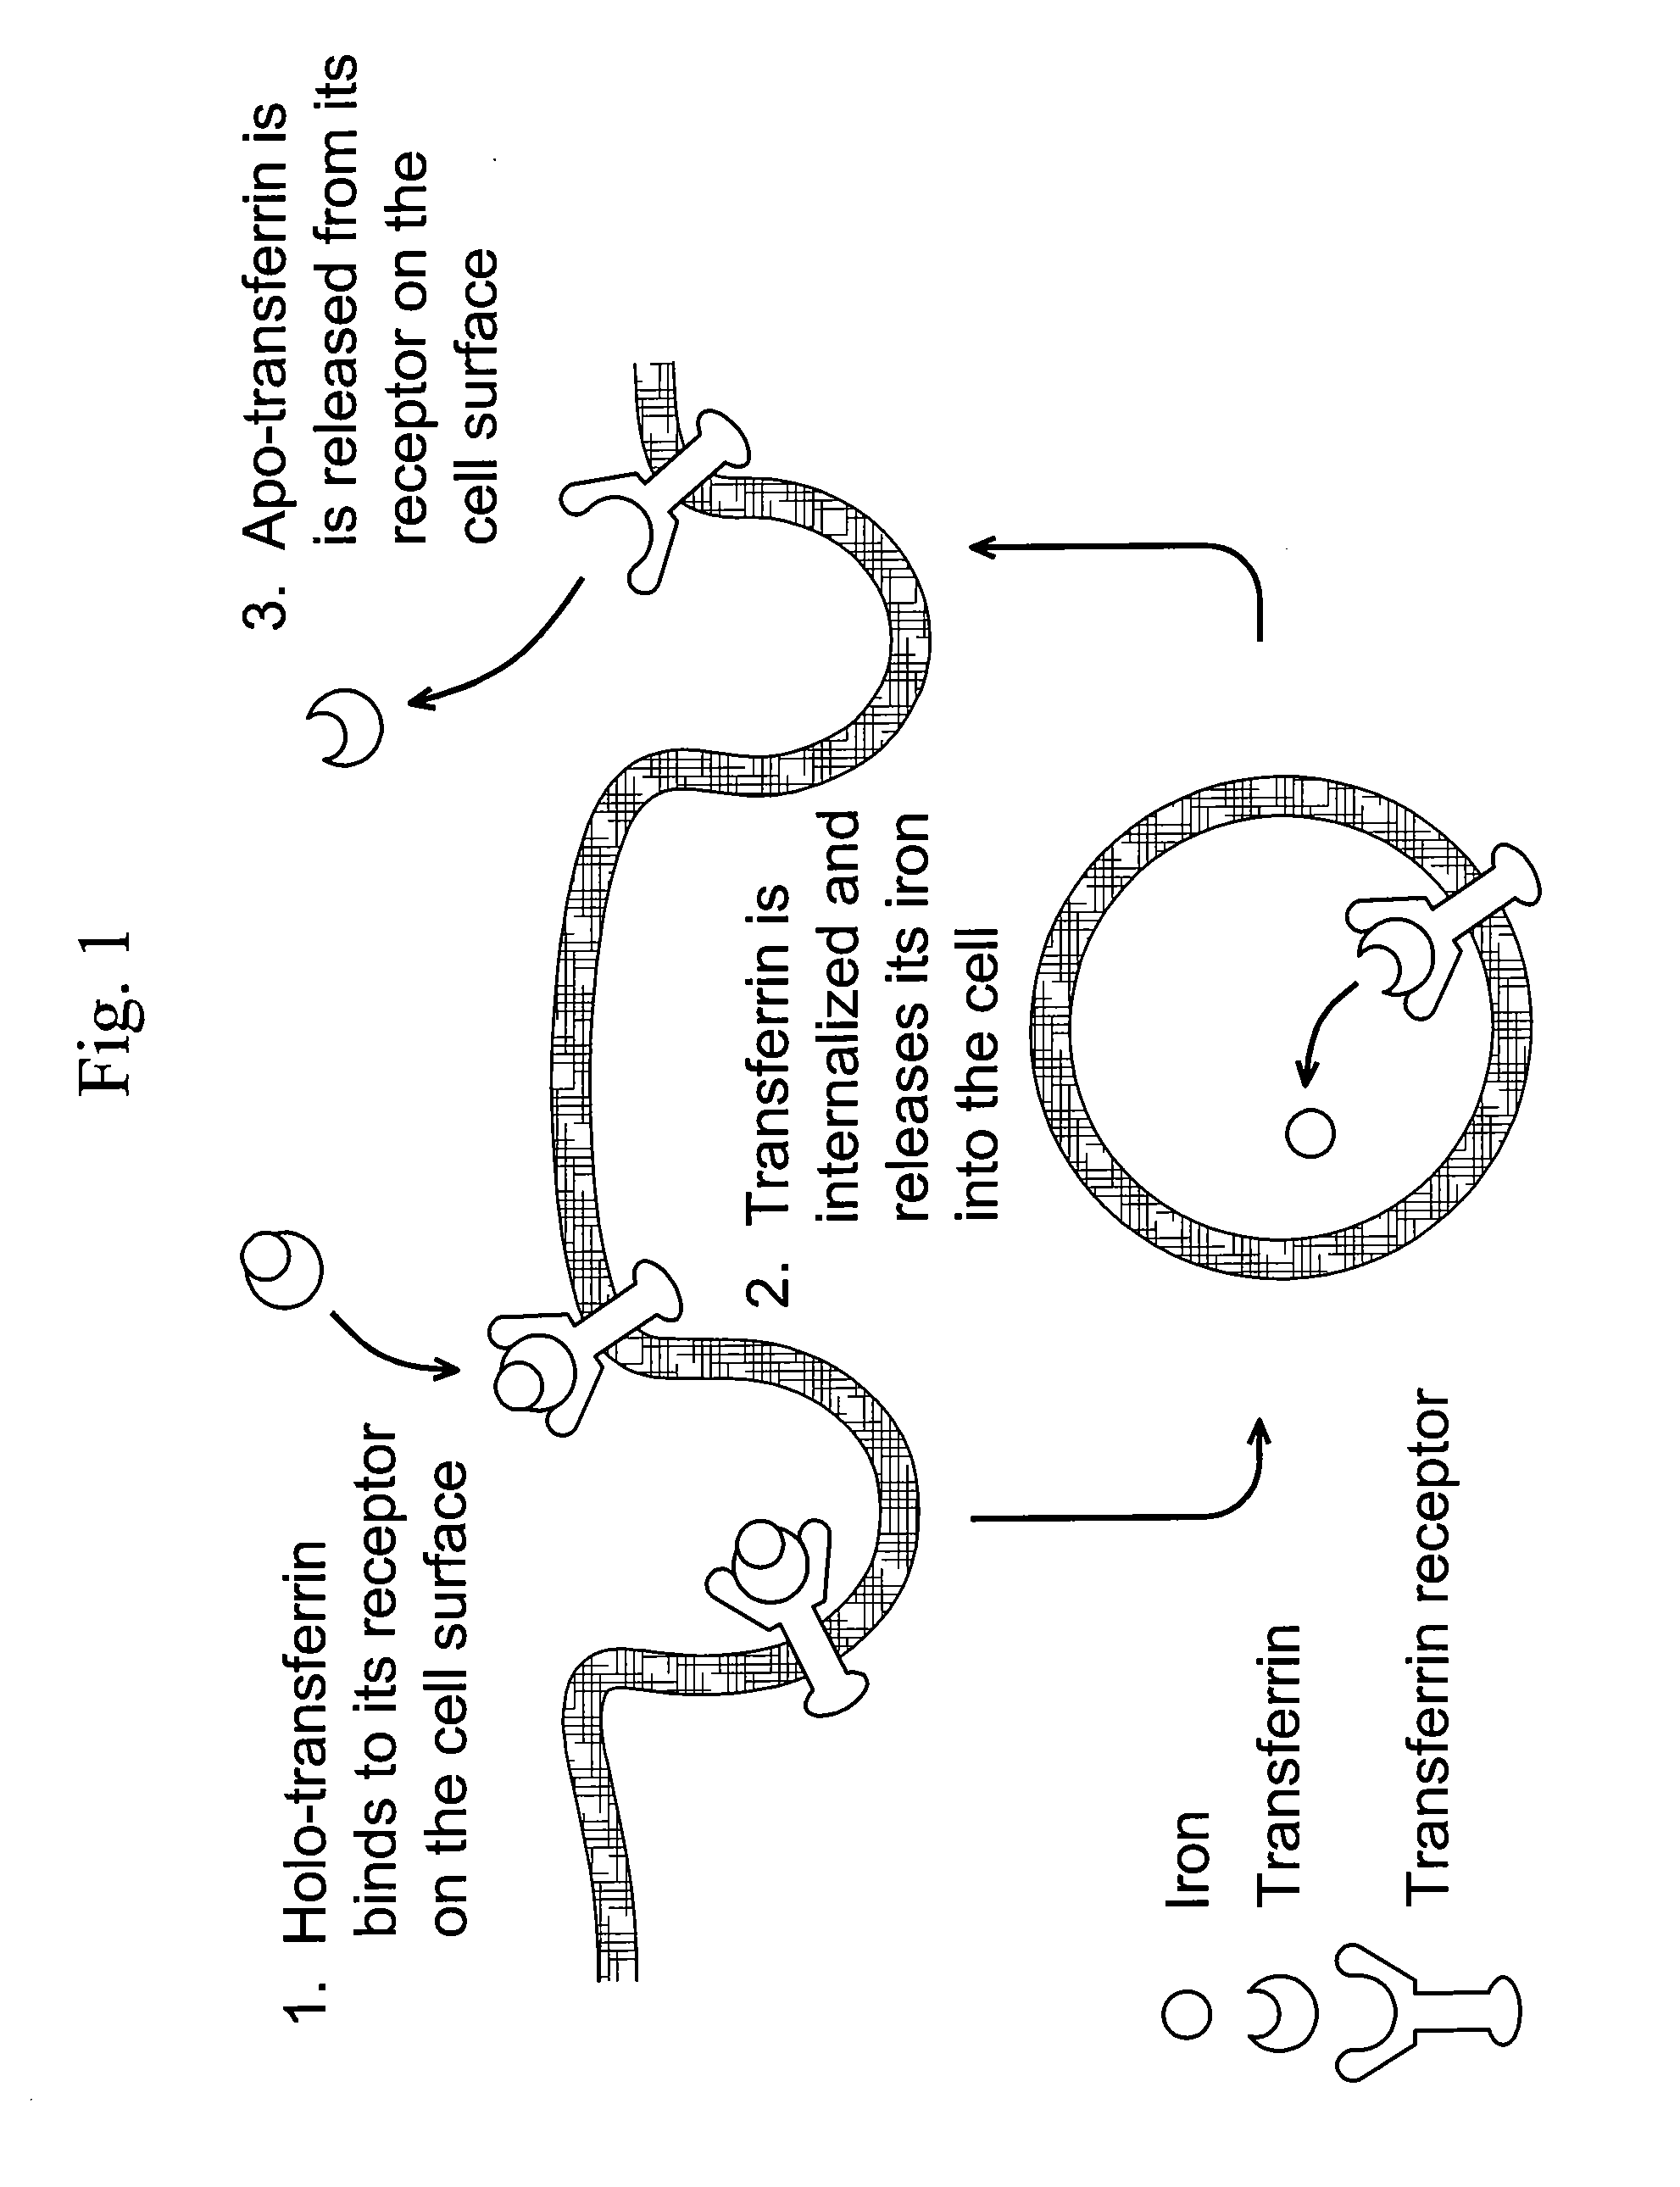 Cancer drug delivery using modified transferrin